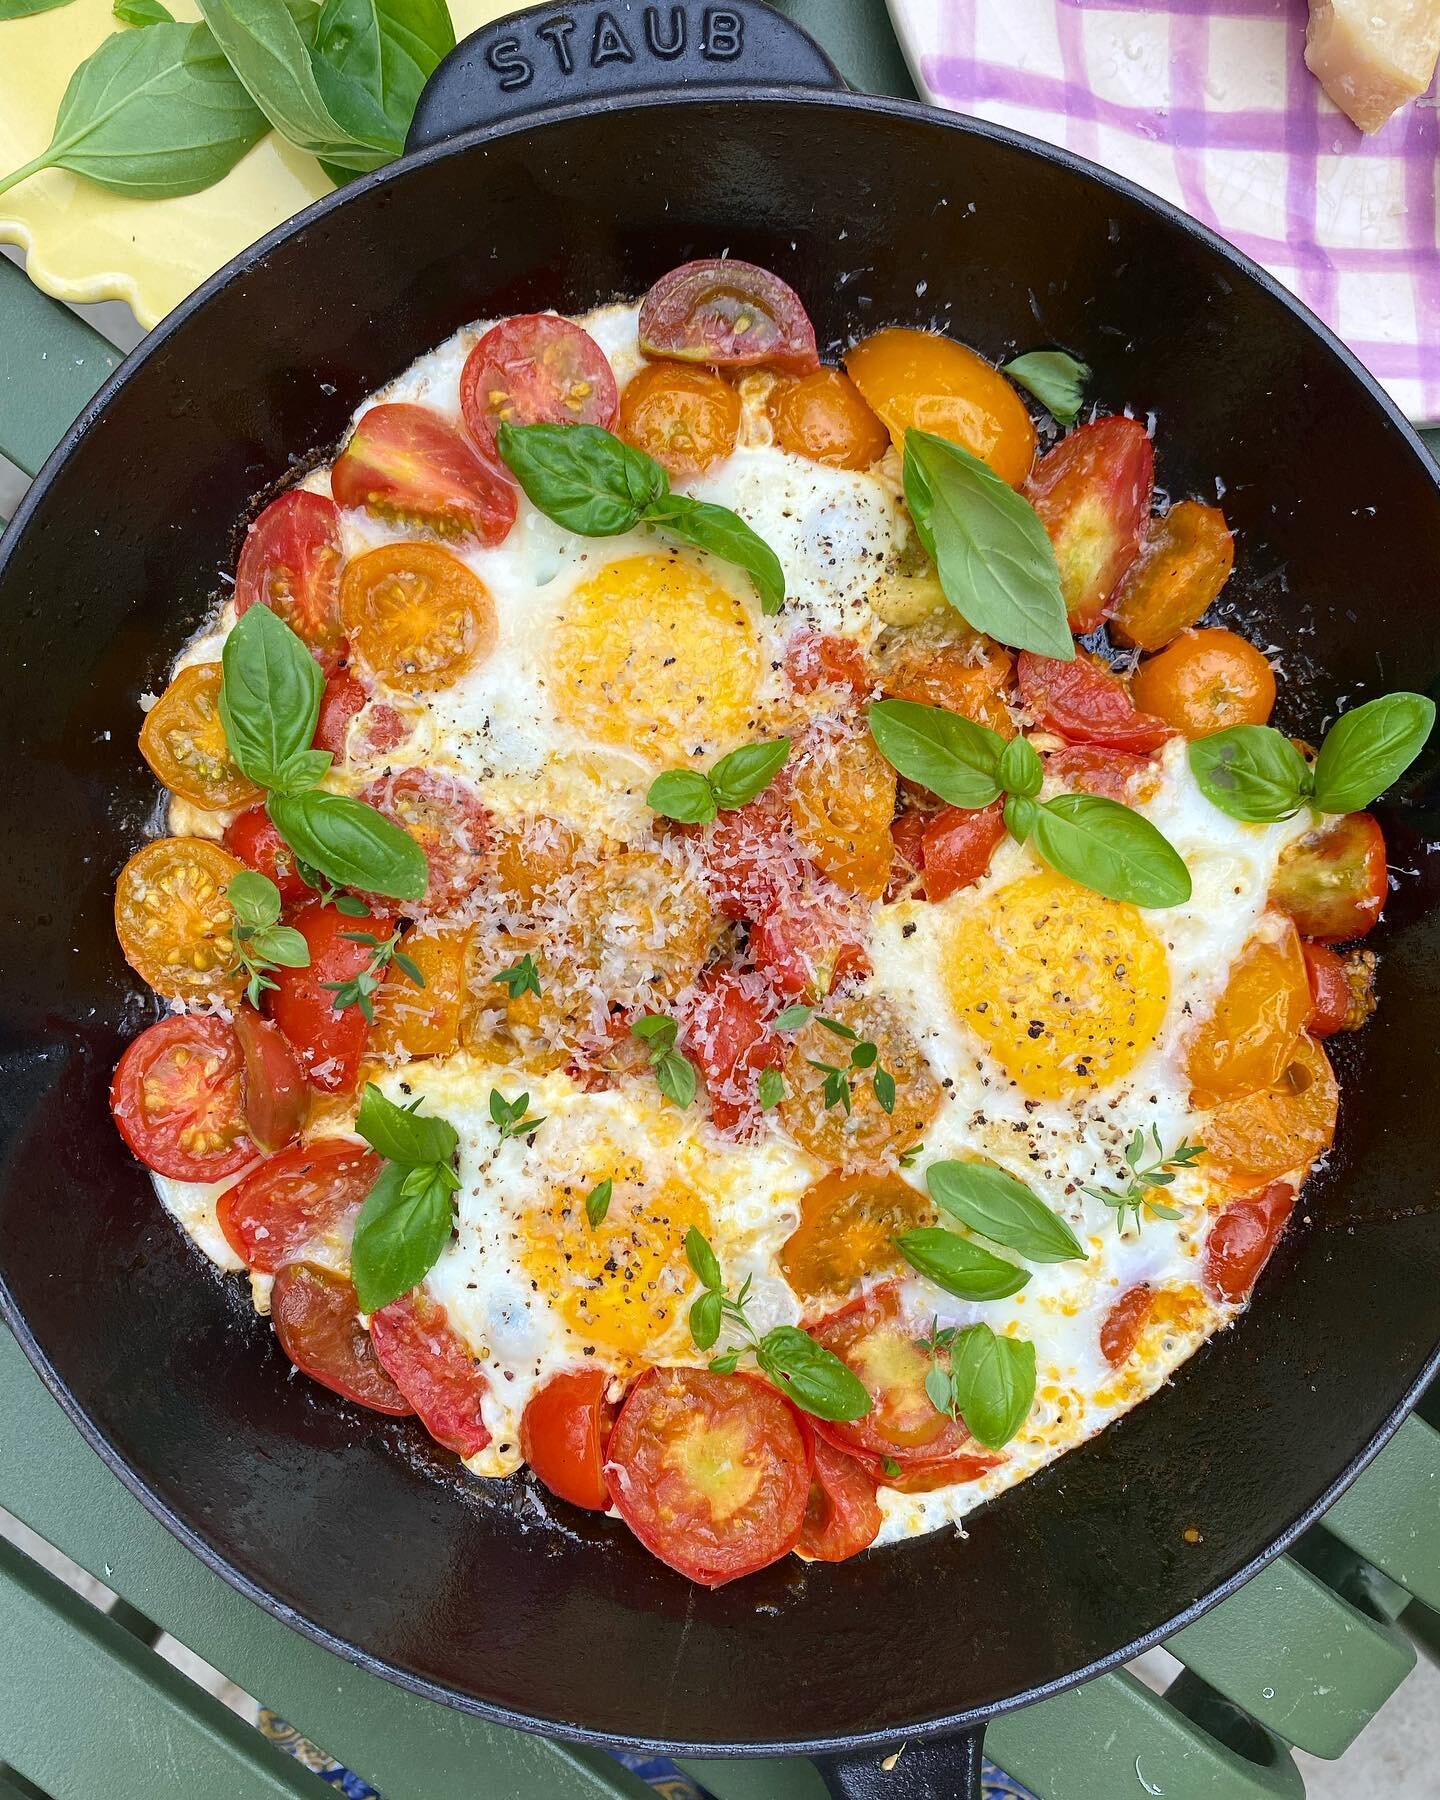 Summer tomato eggs - easiest weekend breakfast 🍅 recipe below enjoy!

Feeds 2, takes 10 minutes

2 tbsp olive oil, butter or ghee
250g cherry tomatoes
3+ eggs
Small bunch of basil, to serve
Small handful of grated Grana Padano, parmesan, cheddar to 